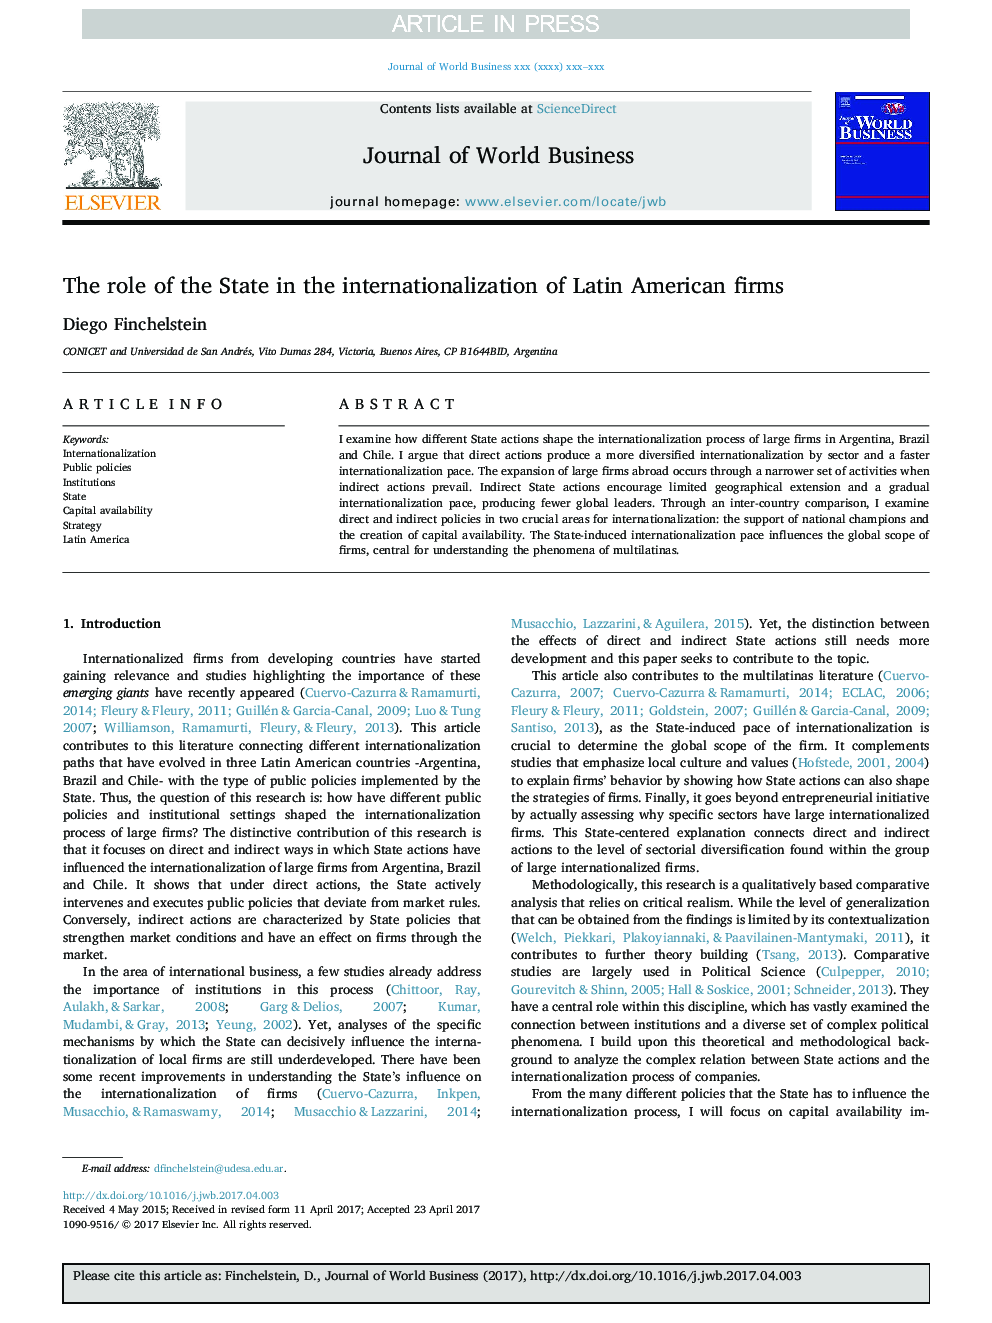 The role of the State in the internationalization of Latin American firms